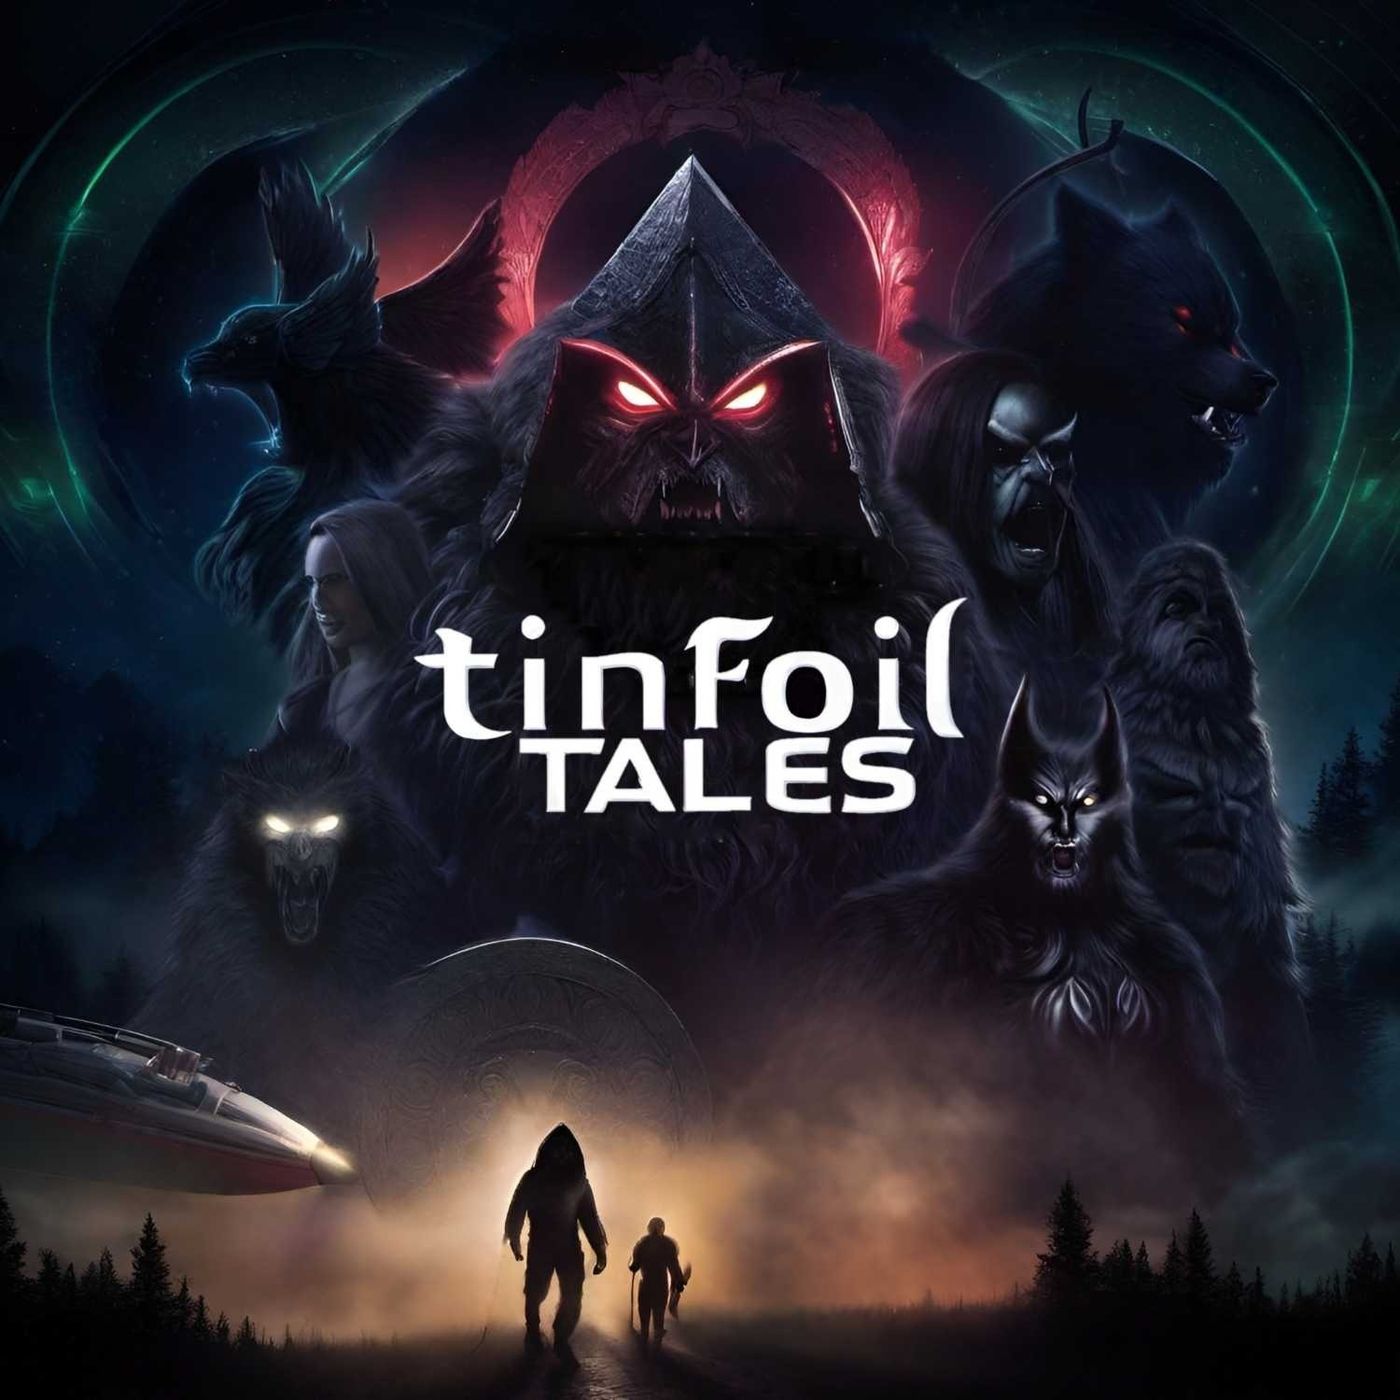 What is Tinfoil Tales?